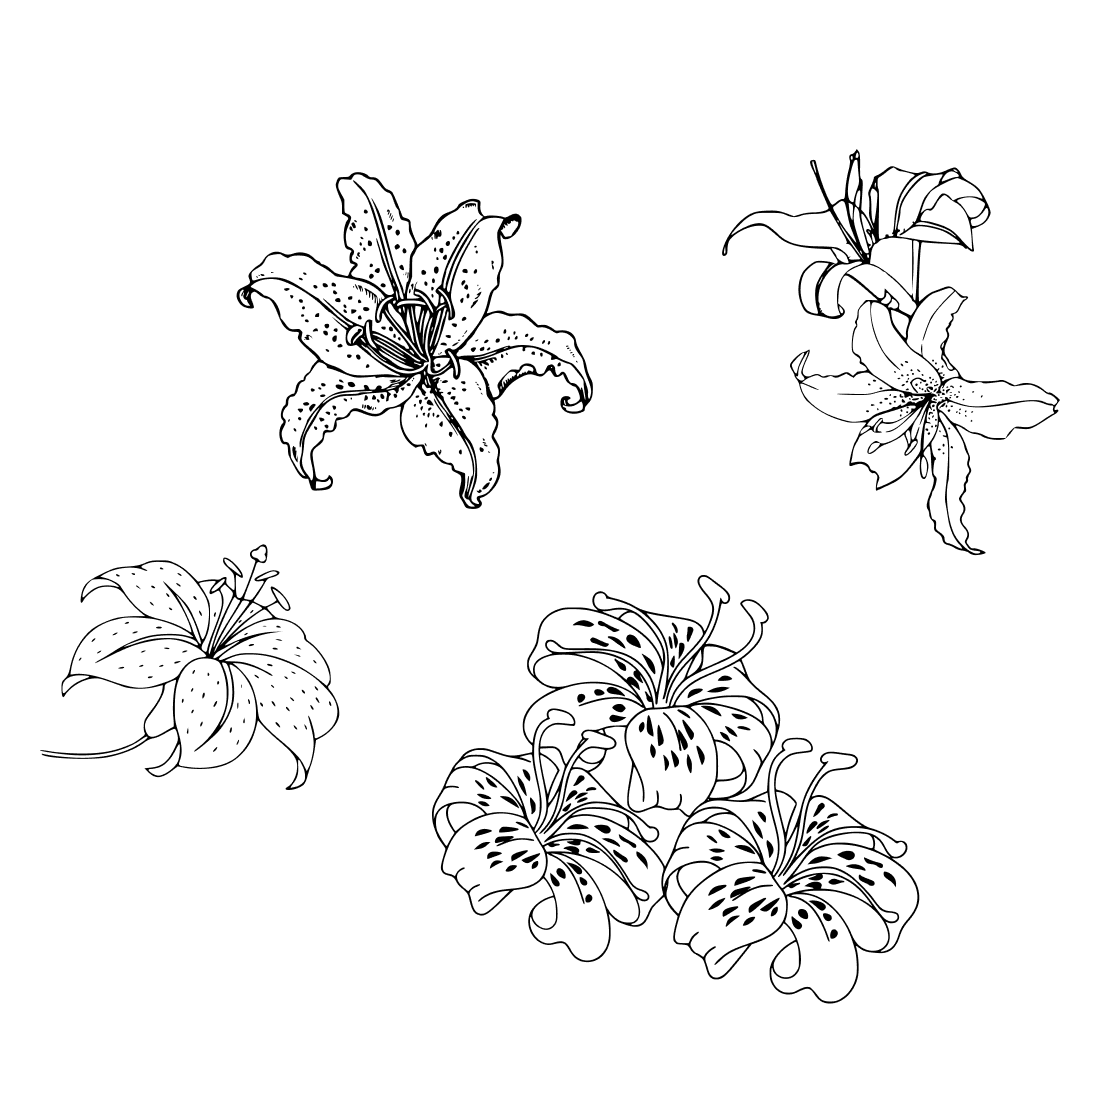 Tiger Lily Drawings